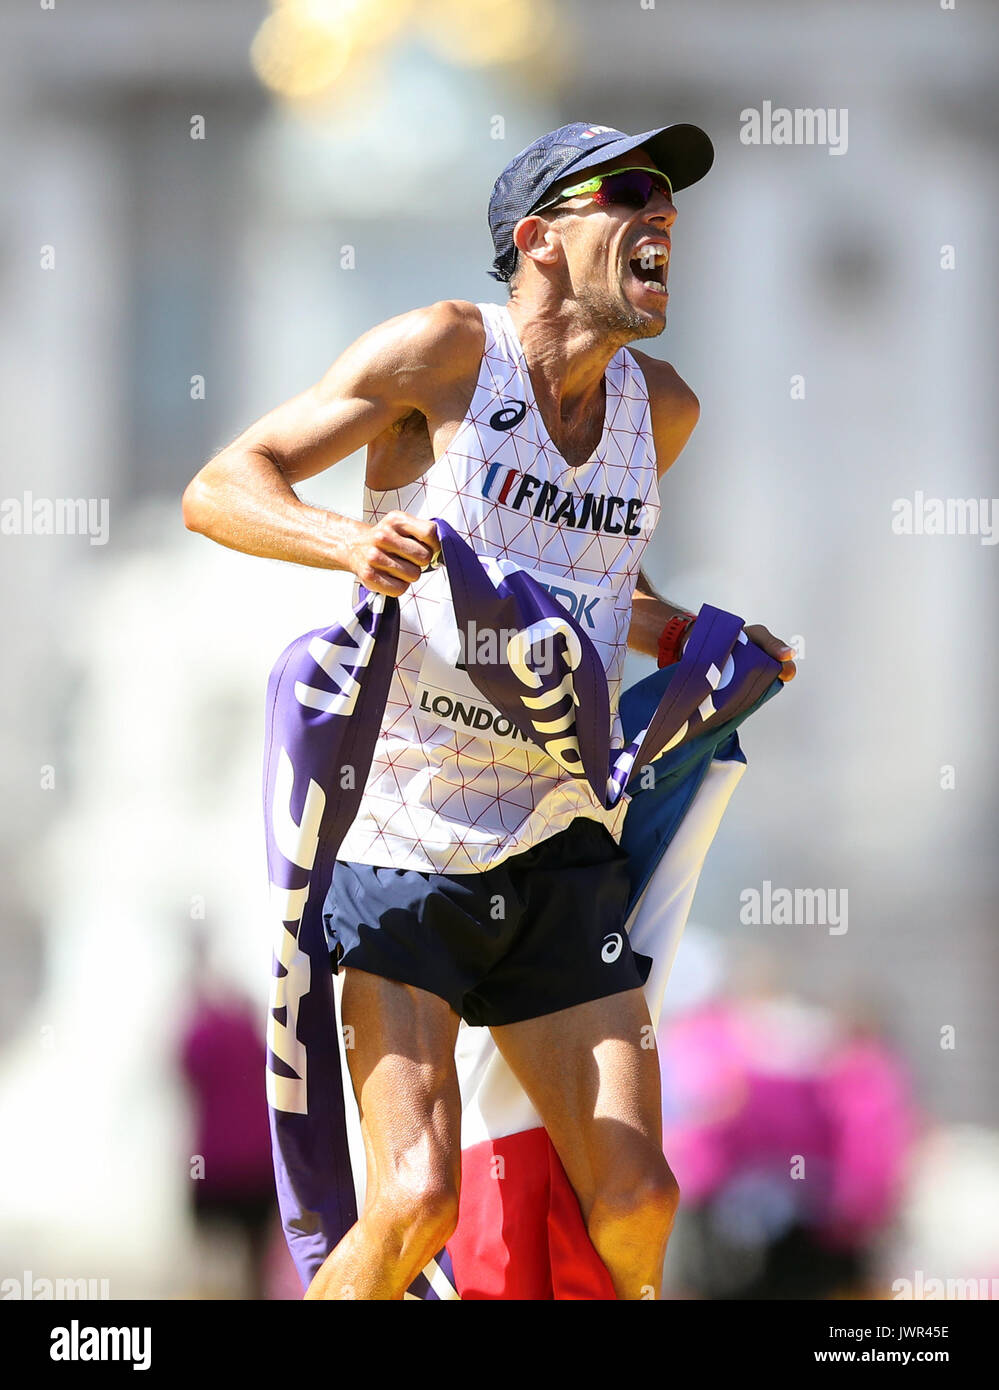 France's Yohann Diniz wins the Men's 50km Race Walk during day ten of the 2017 IAAF World Championships. Picture date: Sunday August 13, 2017. See PA story ATHLETICS World. Photo credit should read: John Walton/PA Wire. RESTRICTIONS: Editorial use only. No transmission of sound or moving images and no video simulation. Stock Photo